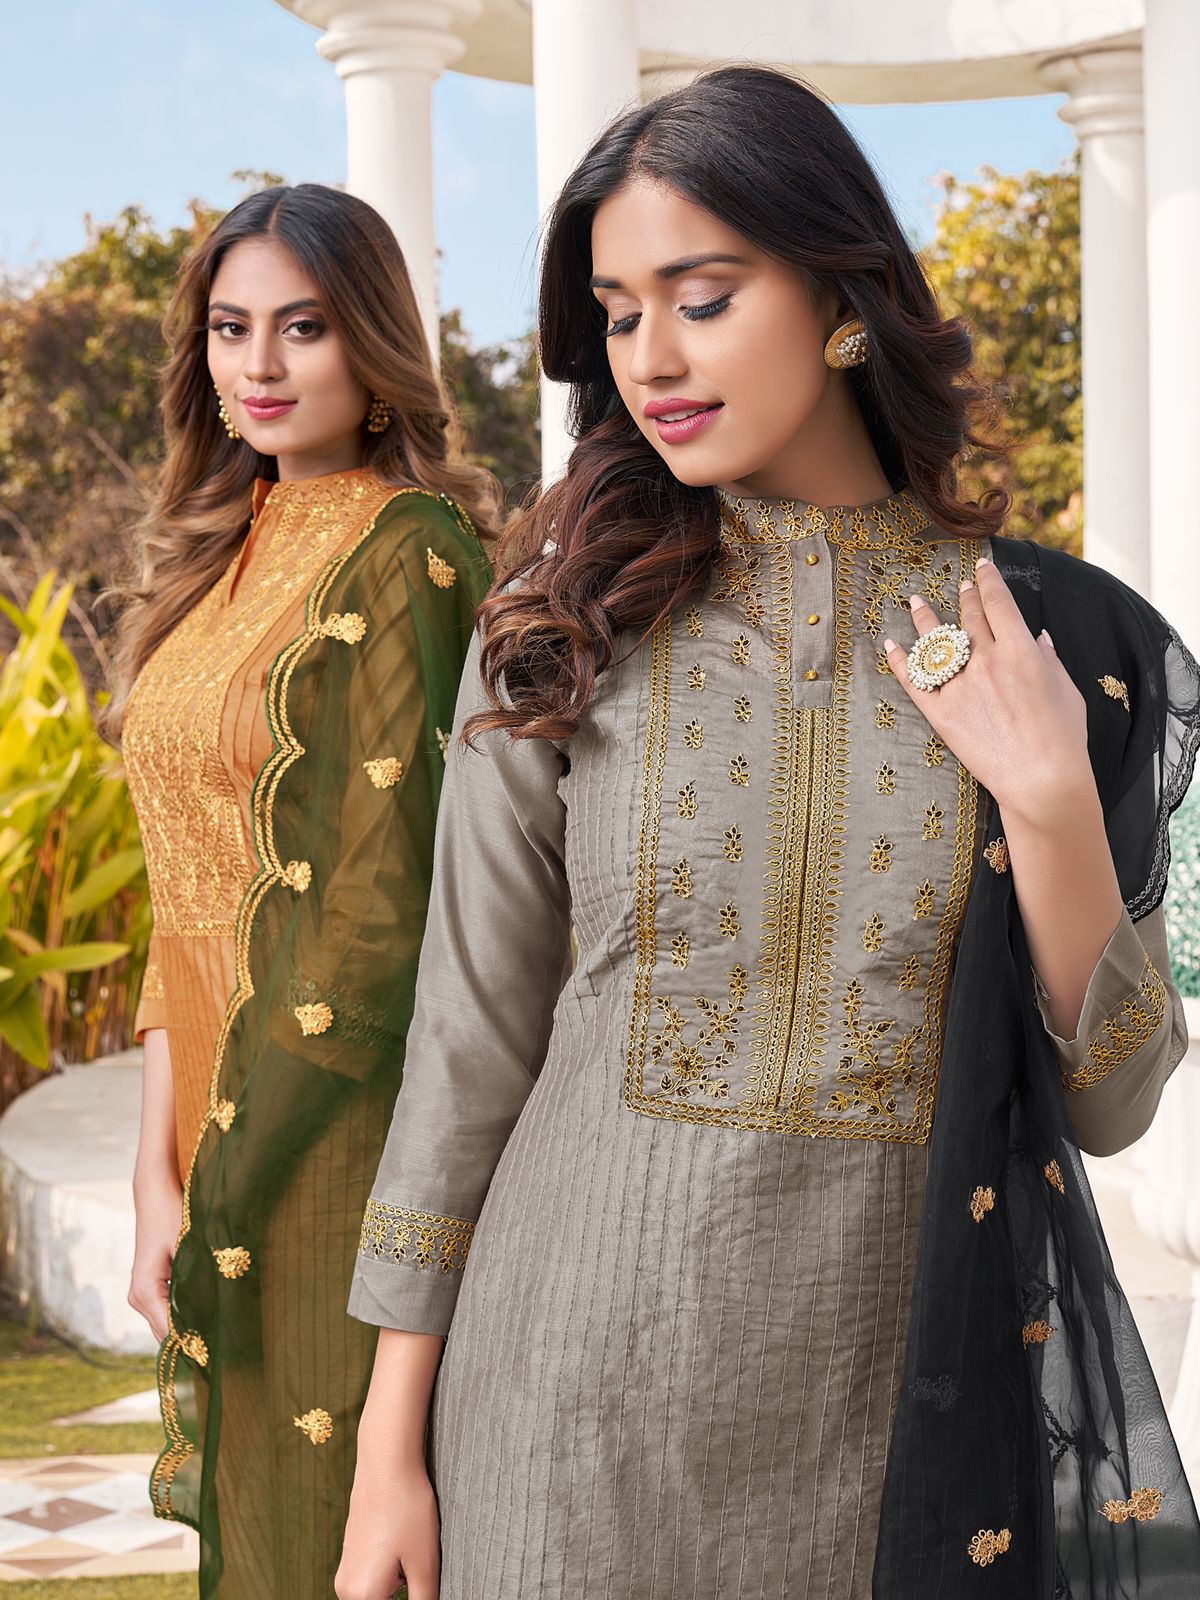 Readymade Salwar Suits - Buy Readymade Suits Online US UK